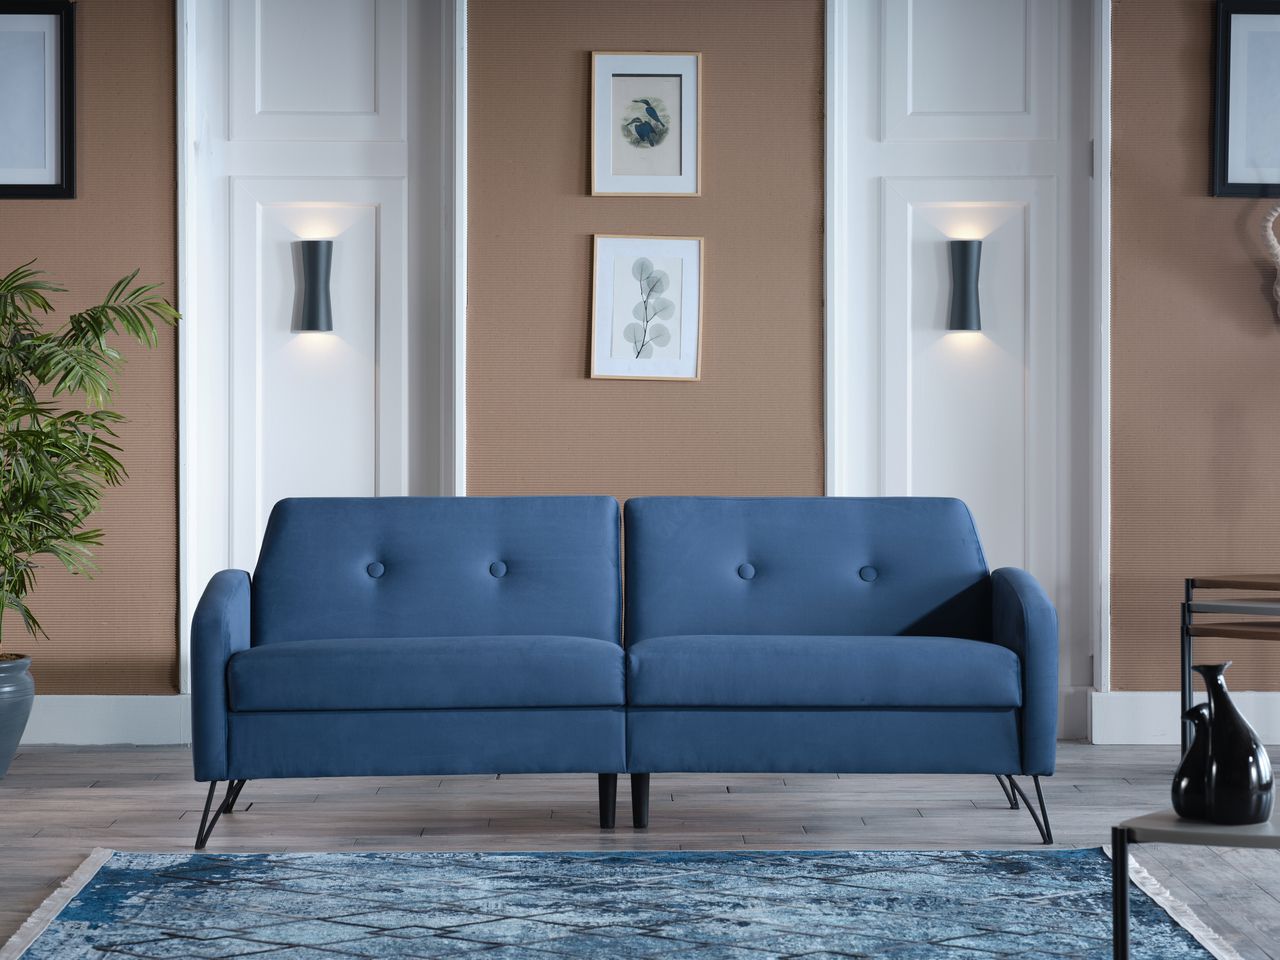 Juniper Vika Navy Blue 3 Seat Sleeper Sofabellona | 1stopbedrooms Within Navy Sleeper Sofa Couches (View 9 of 15)